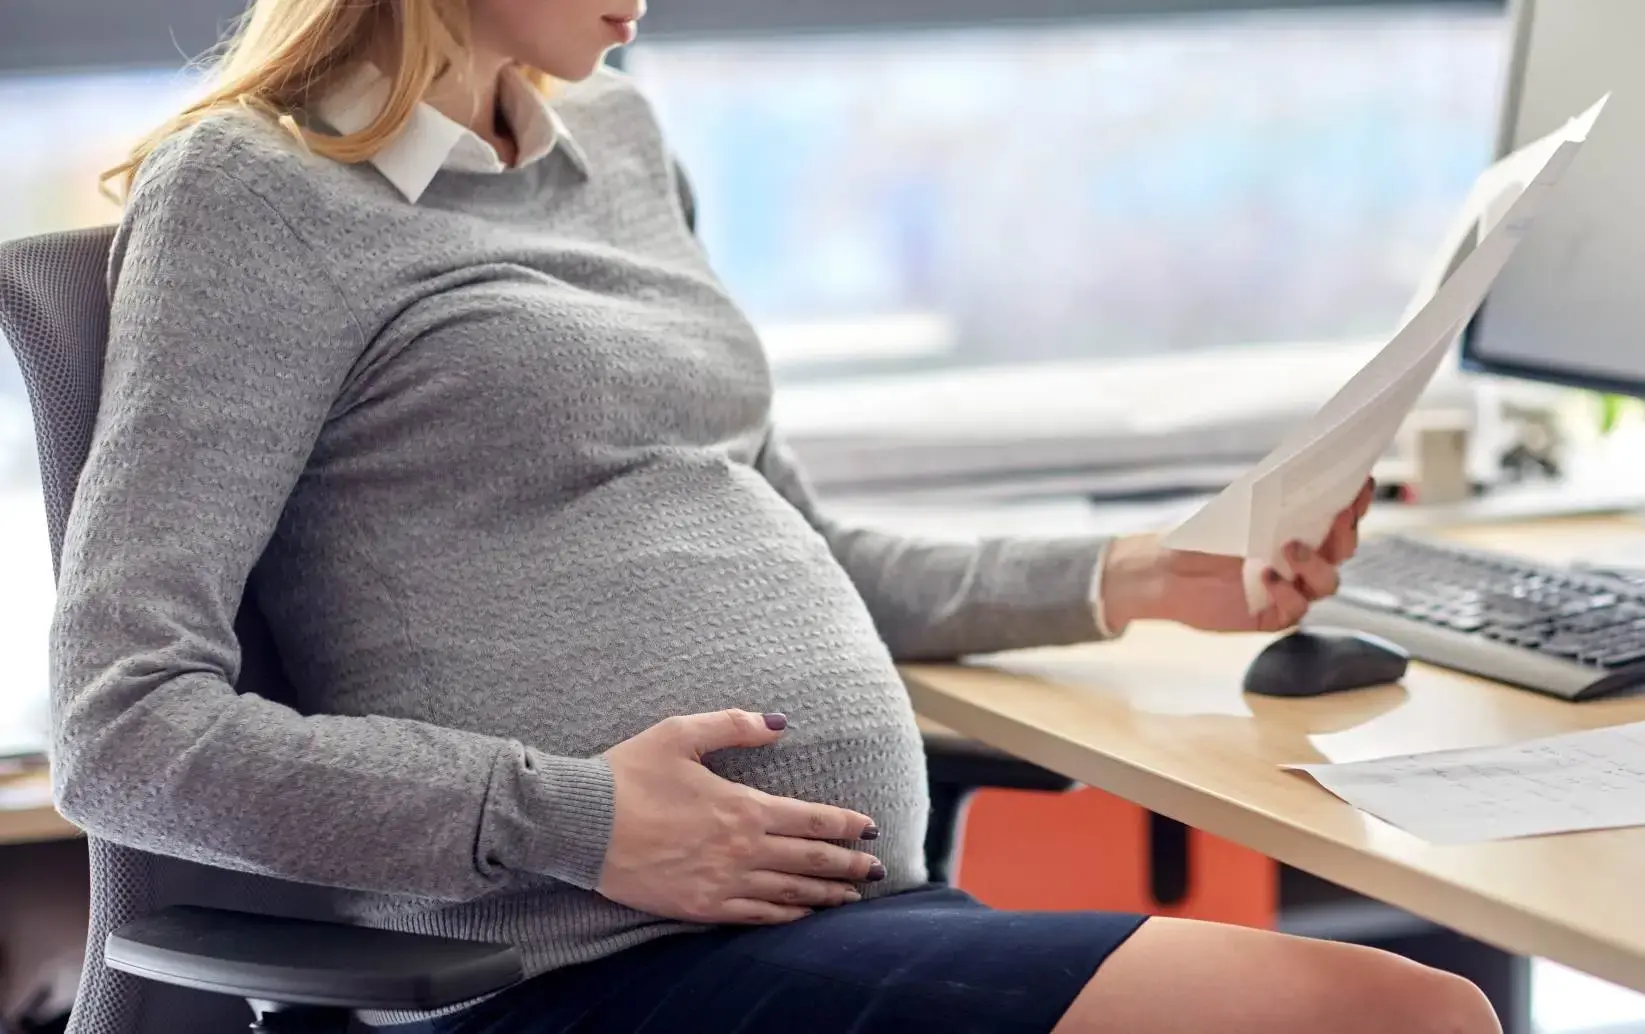 maternity leave -- a pregnant woman at work